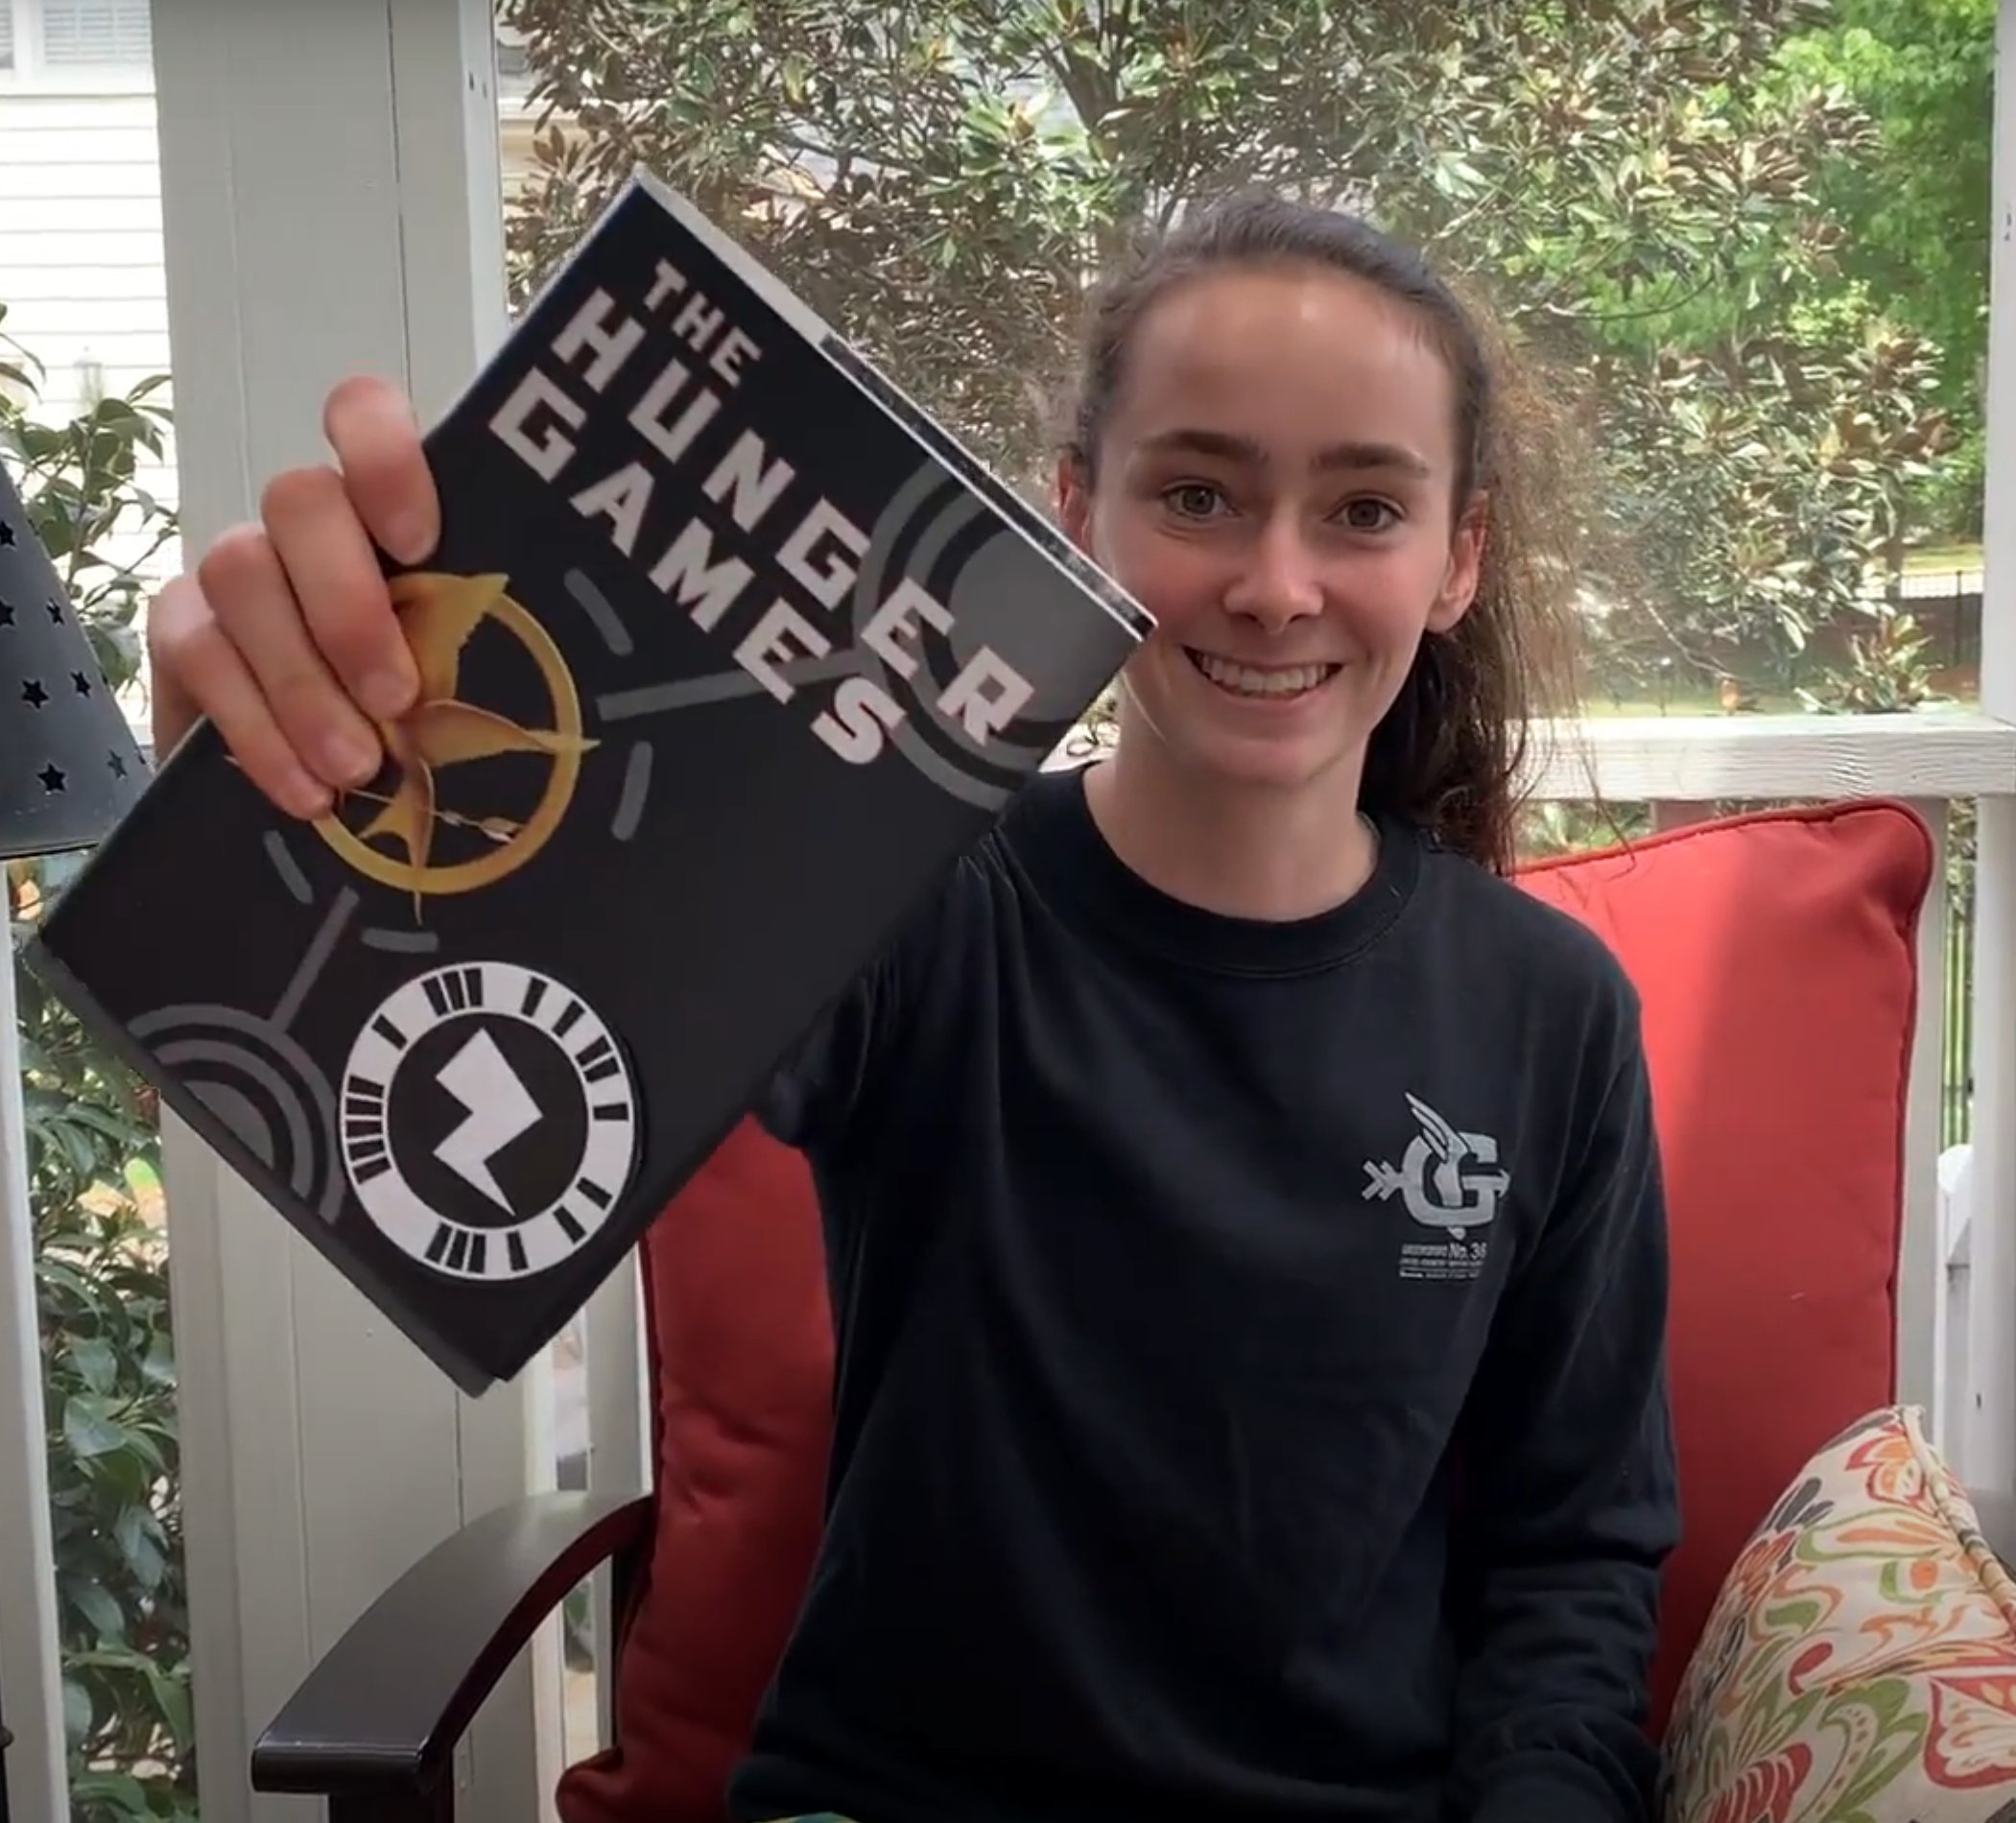 Girl holding up Hunger Games book with ZappAR code attached